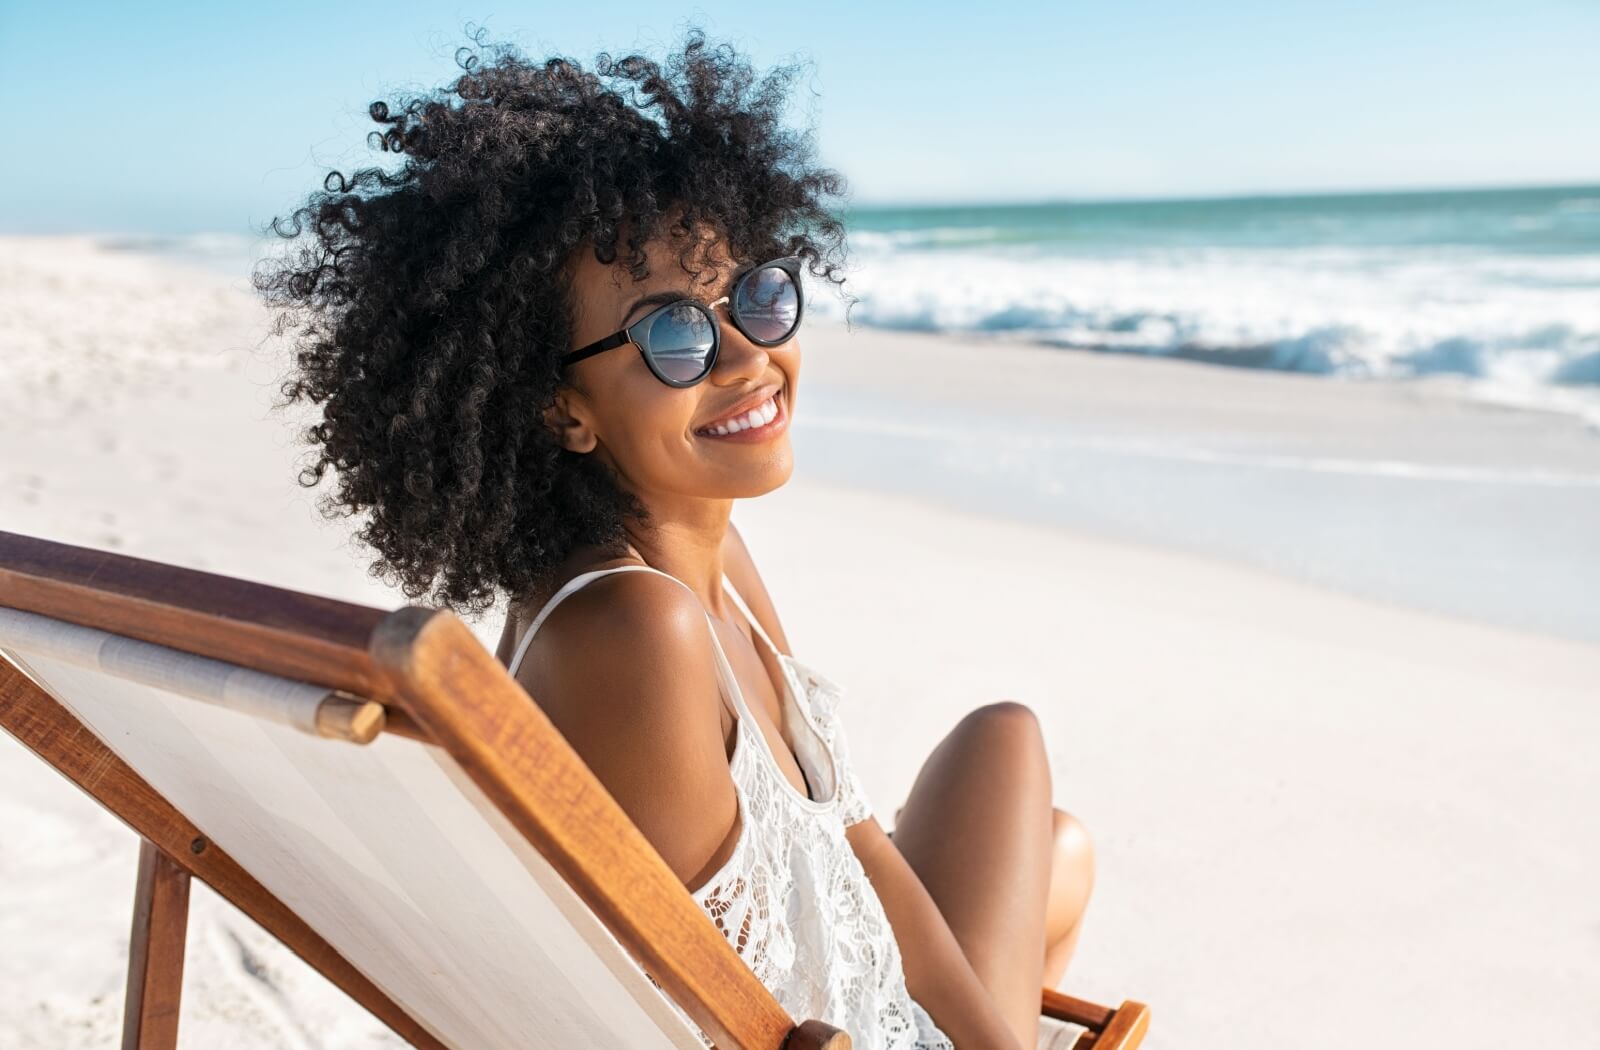 A young woman relaxes on a chair at the beach while wearing her sunglasses to protect here eyes.